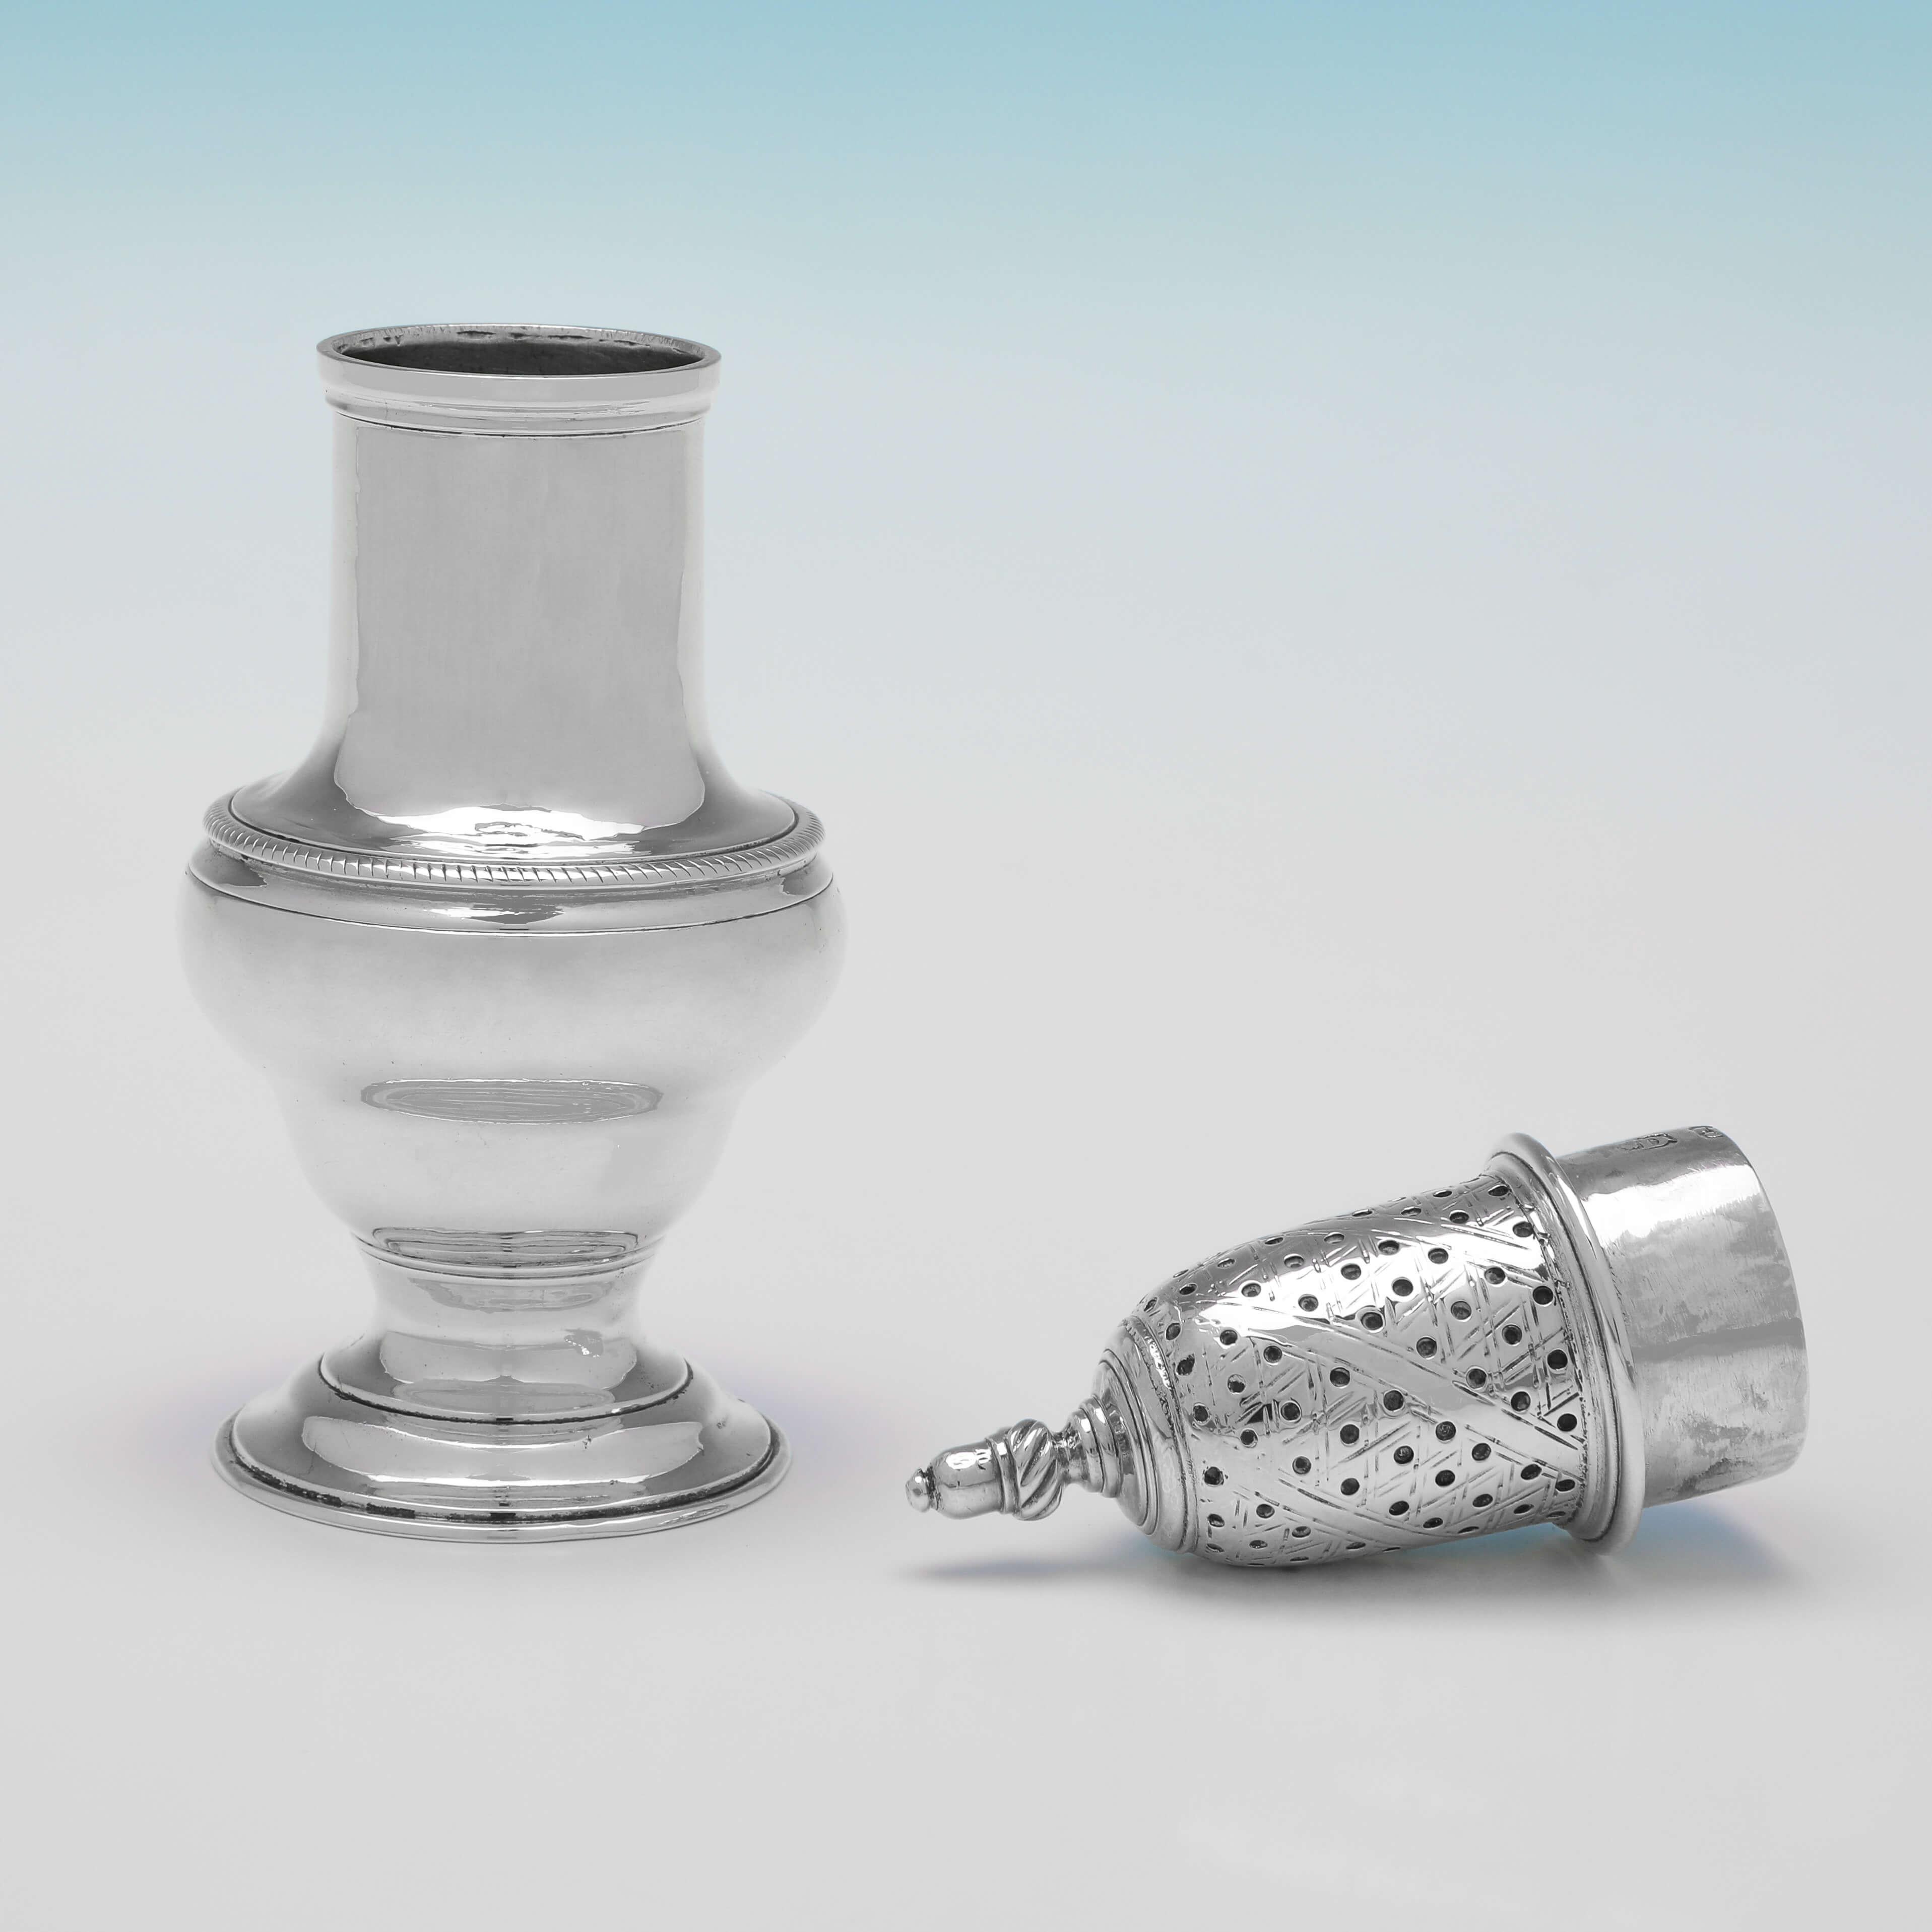 Hallmarked in London in 1764, this handsome, George III, antique sterling silver pepper pot, is of traditional form, and features both rope and reed borders. 

The pepper pot measures 5.5